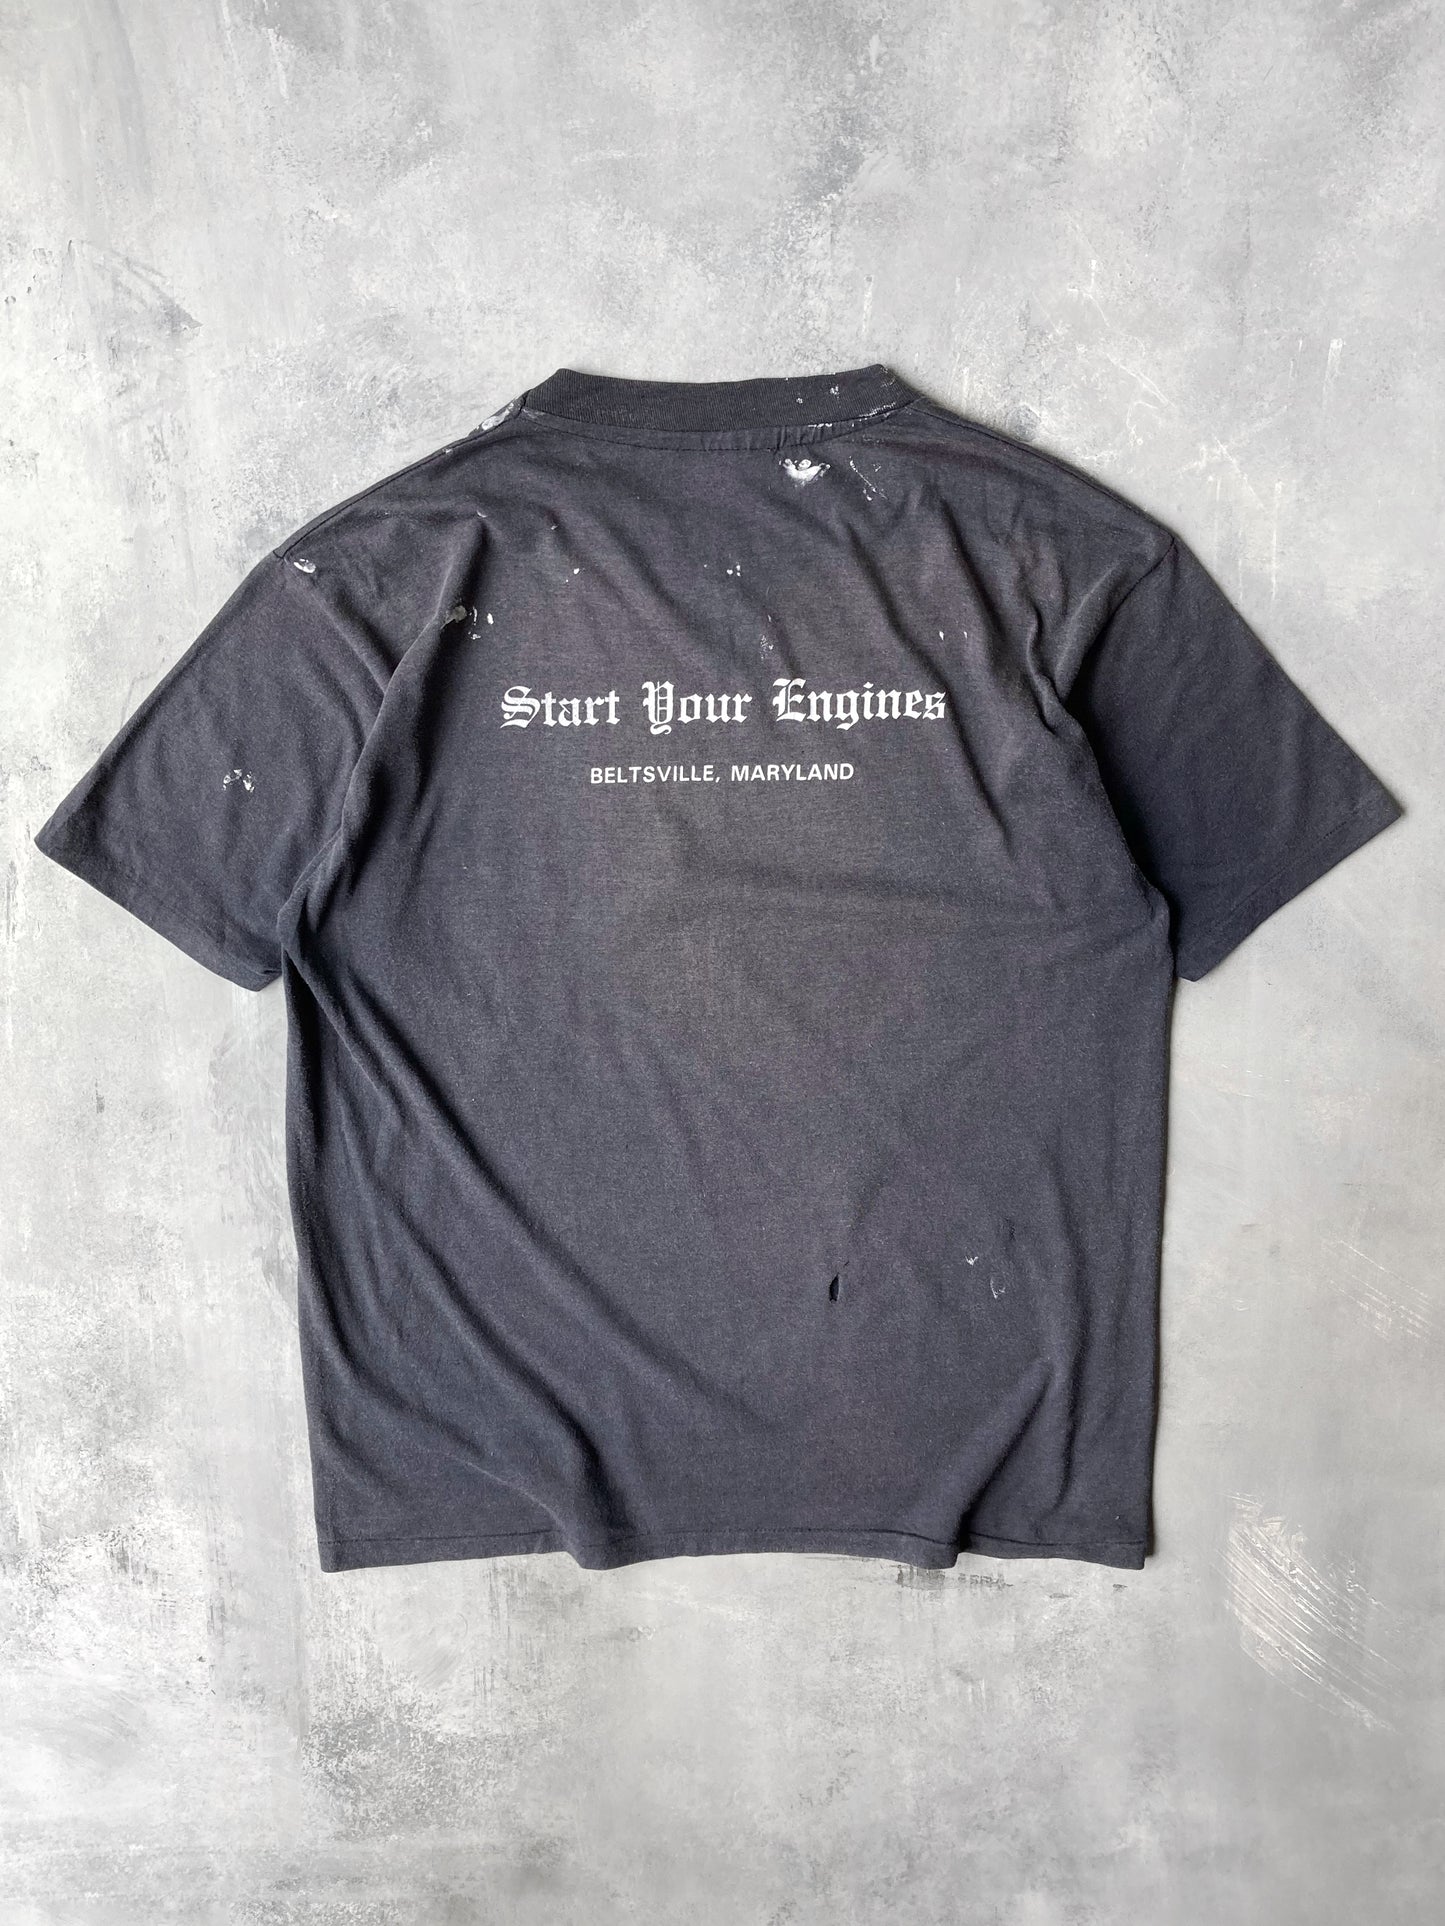 Start Your Engines T-Shirt 80's - Large